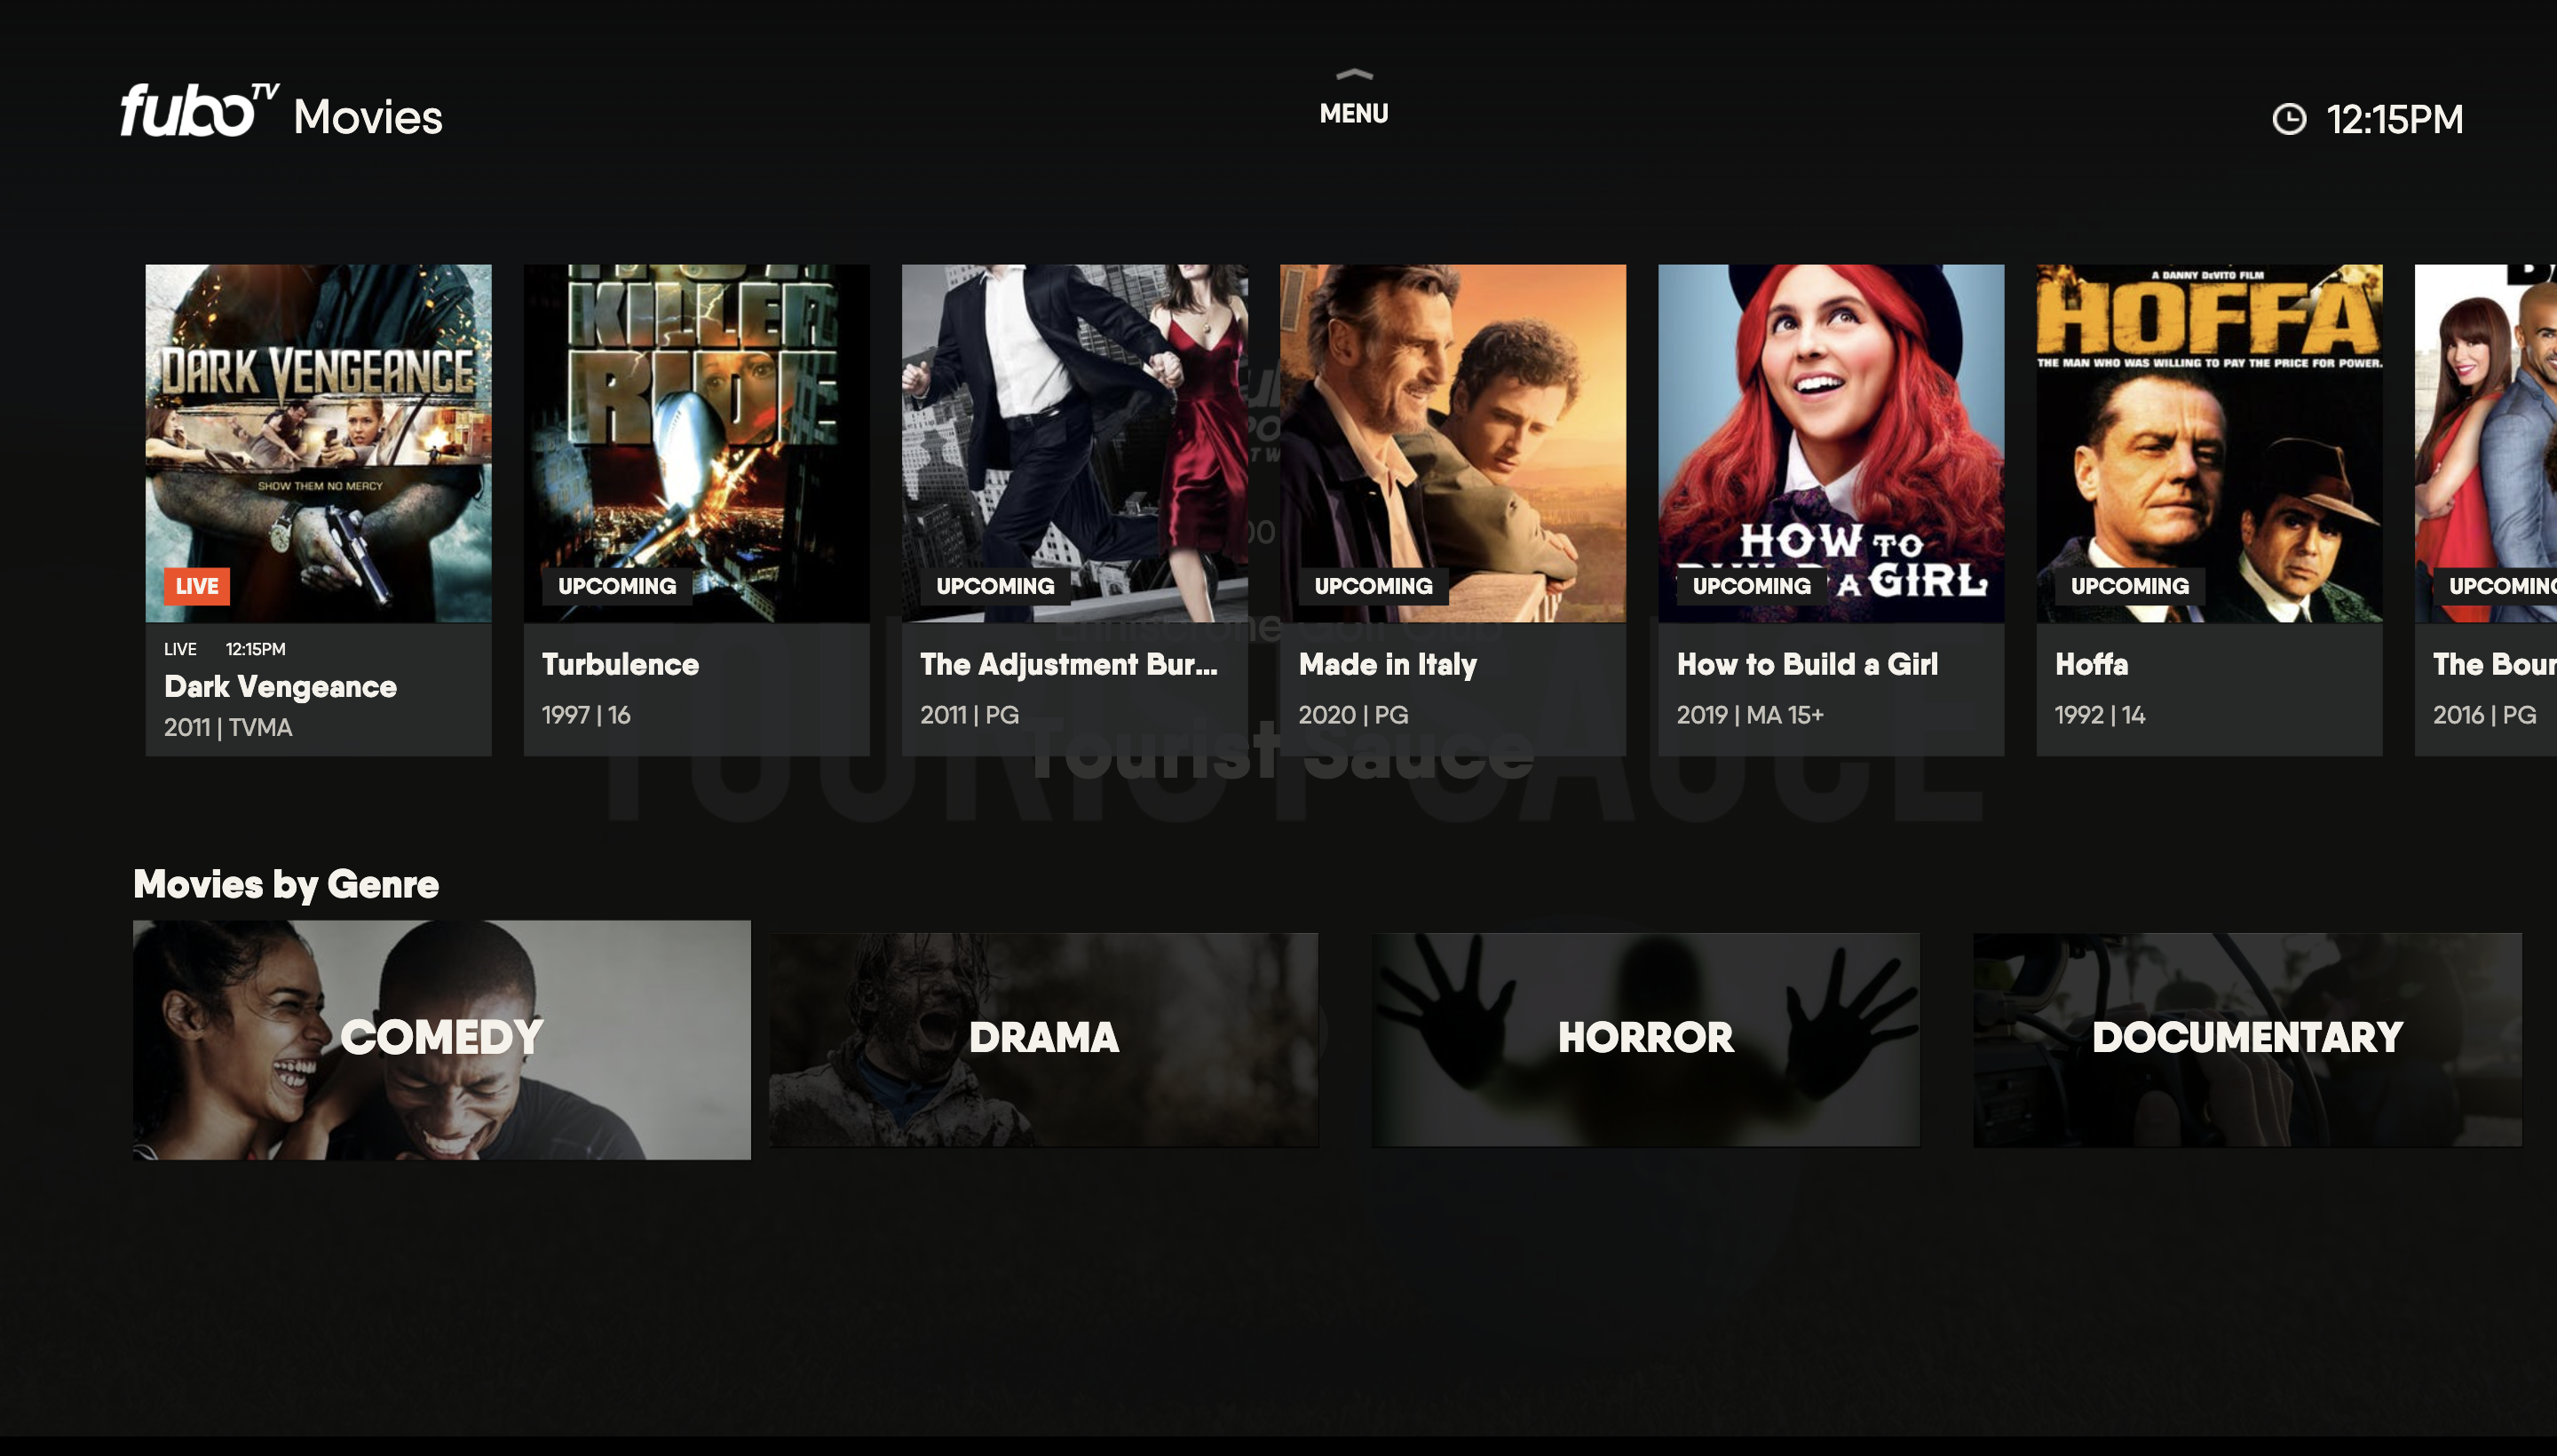 MOVIES screen of the FuboTV app on Xbox with genre filters highlighted